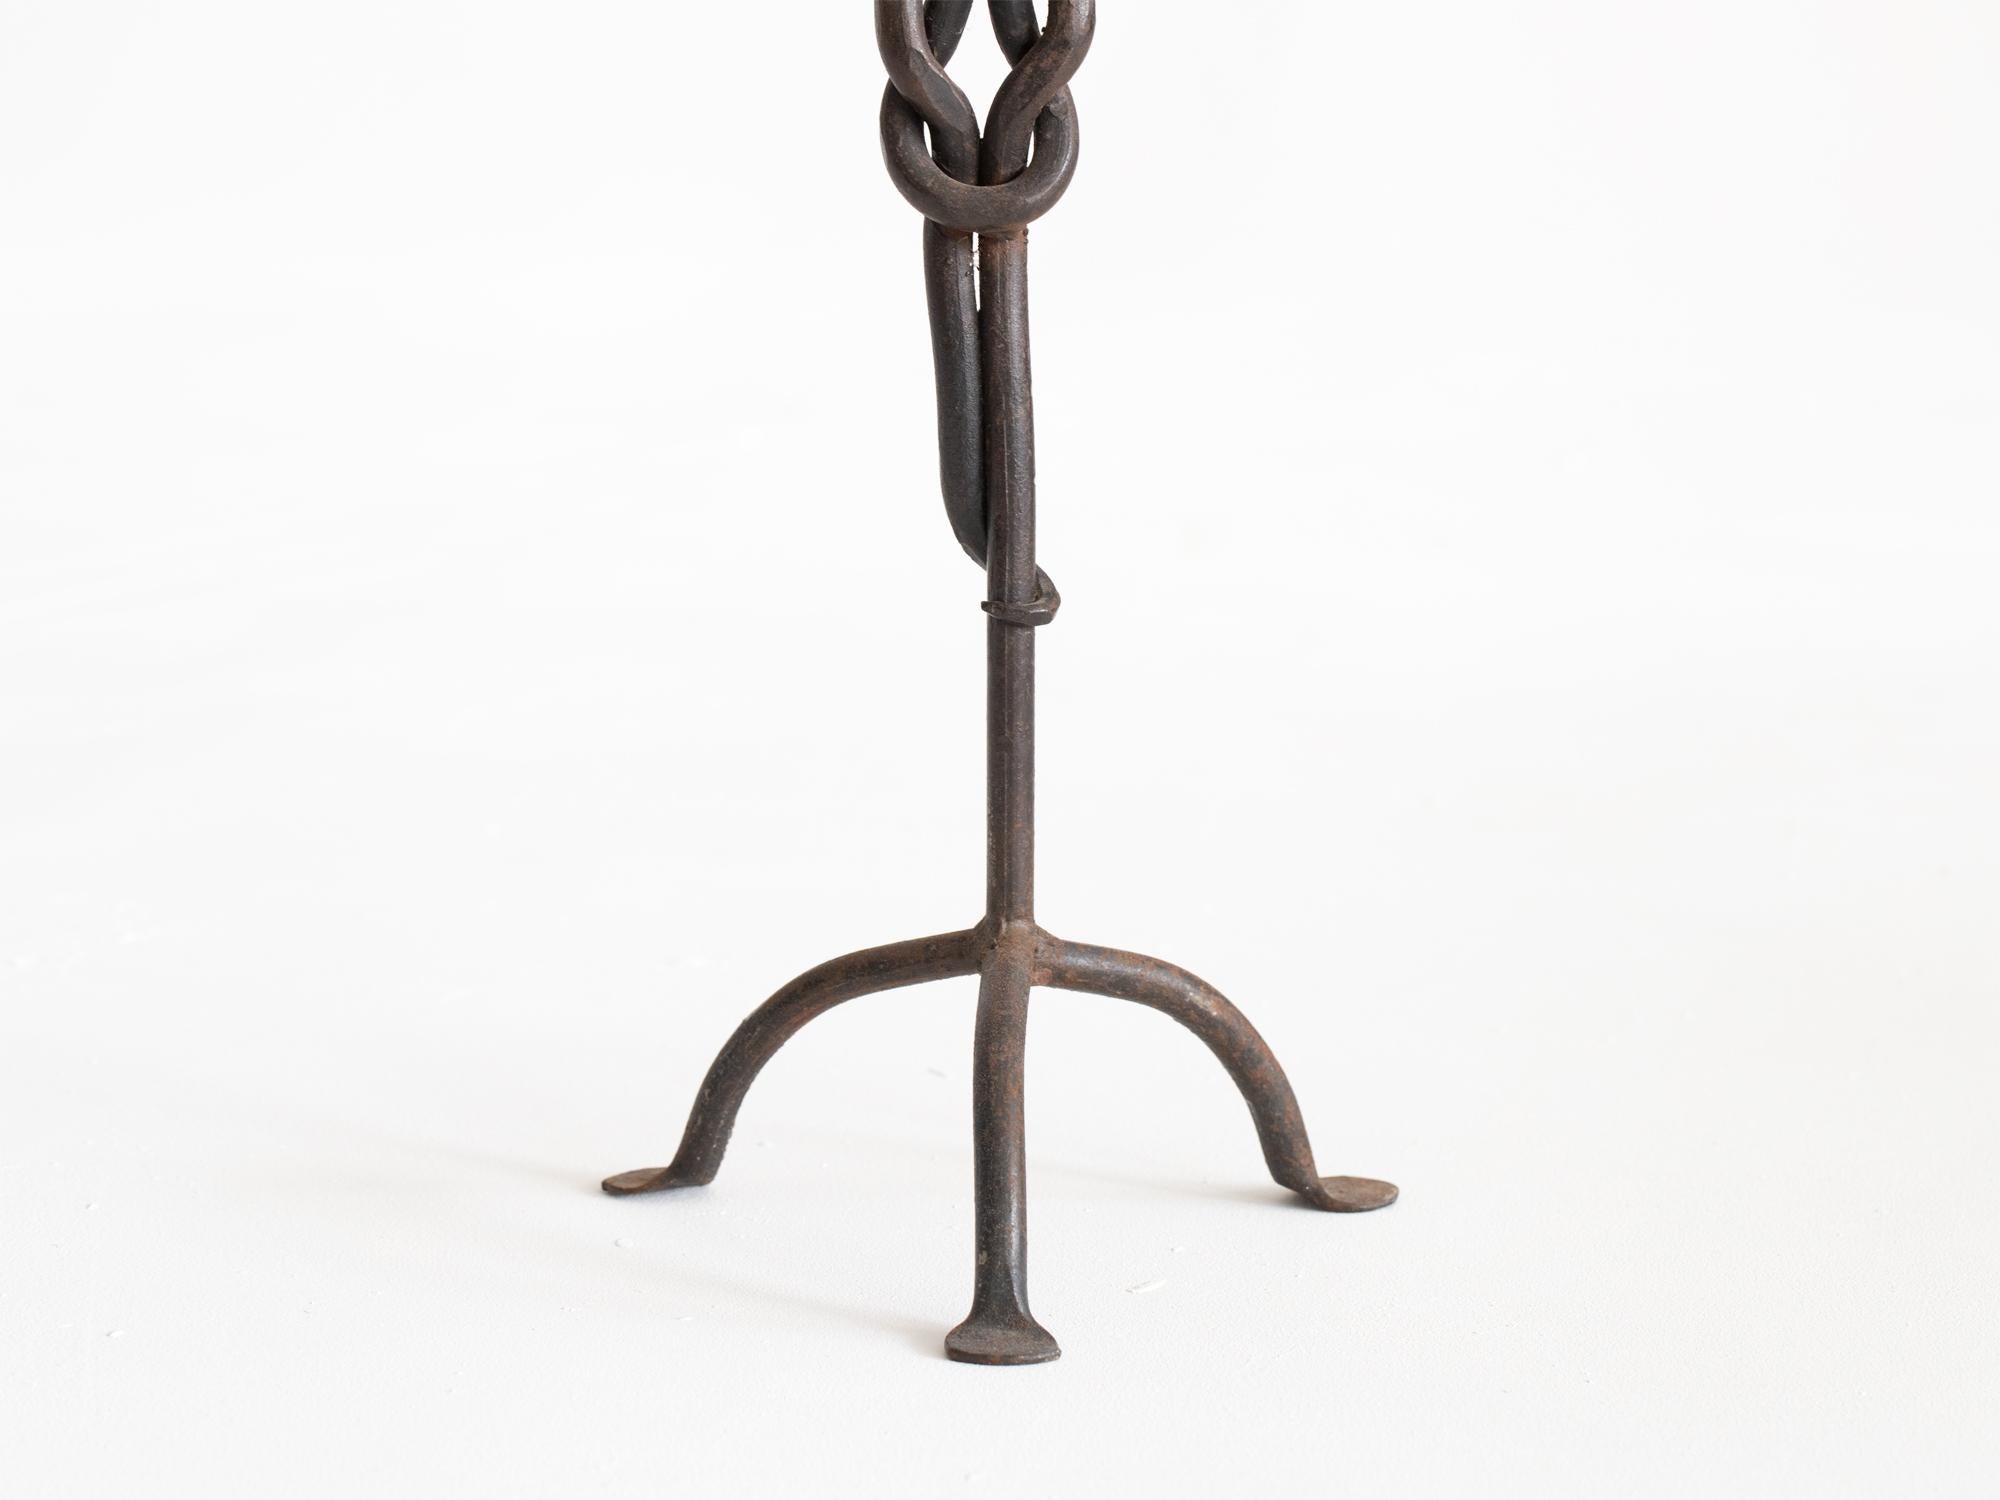 Artisanal French Forged Iron Candlesticks In Good Condition For Sale In Wembley, GB